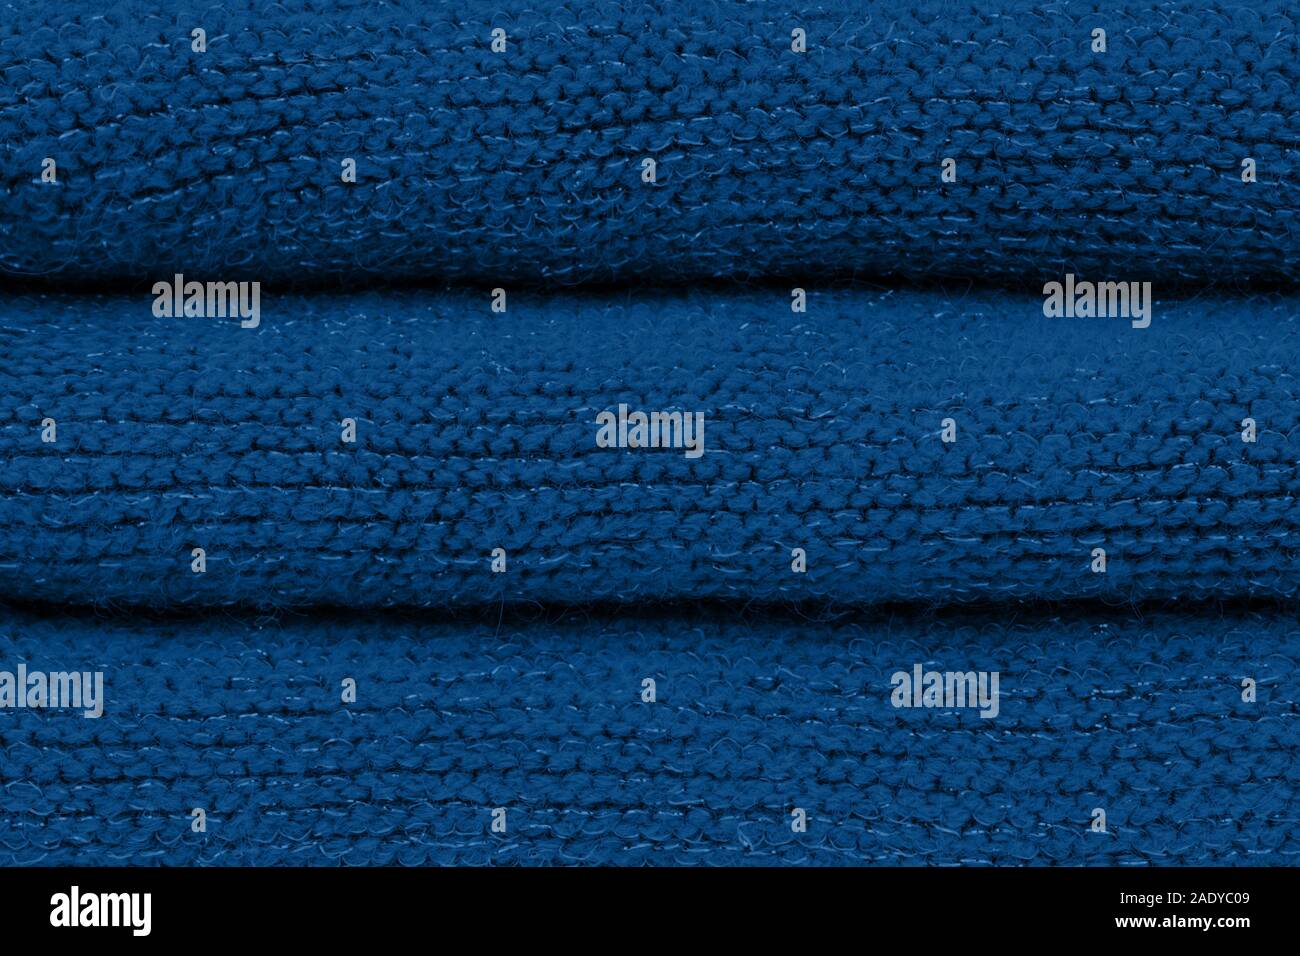 Classic blue color of year 2020. Fashion color autumn-winter 2019-2020 knitted sweater. warm cozy home and fashion colors concept Warm and flattering. Stock Photo